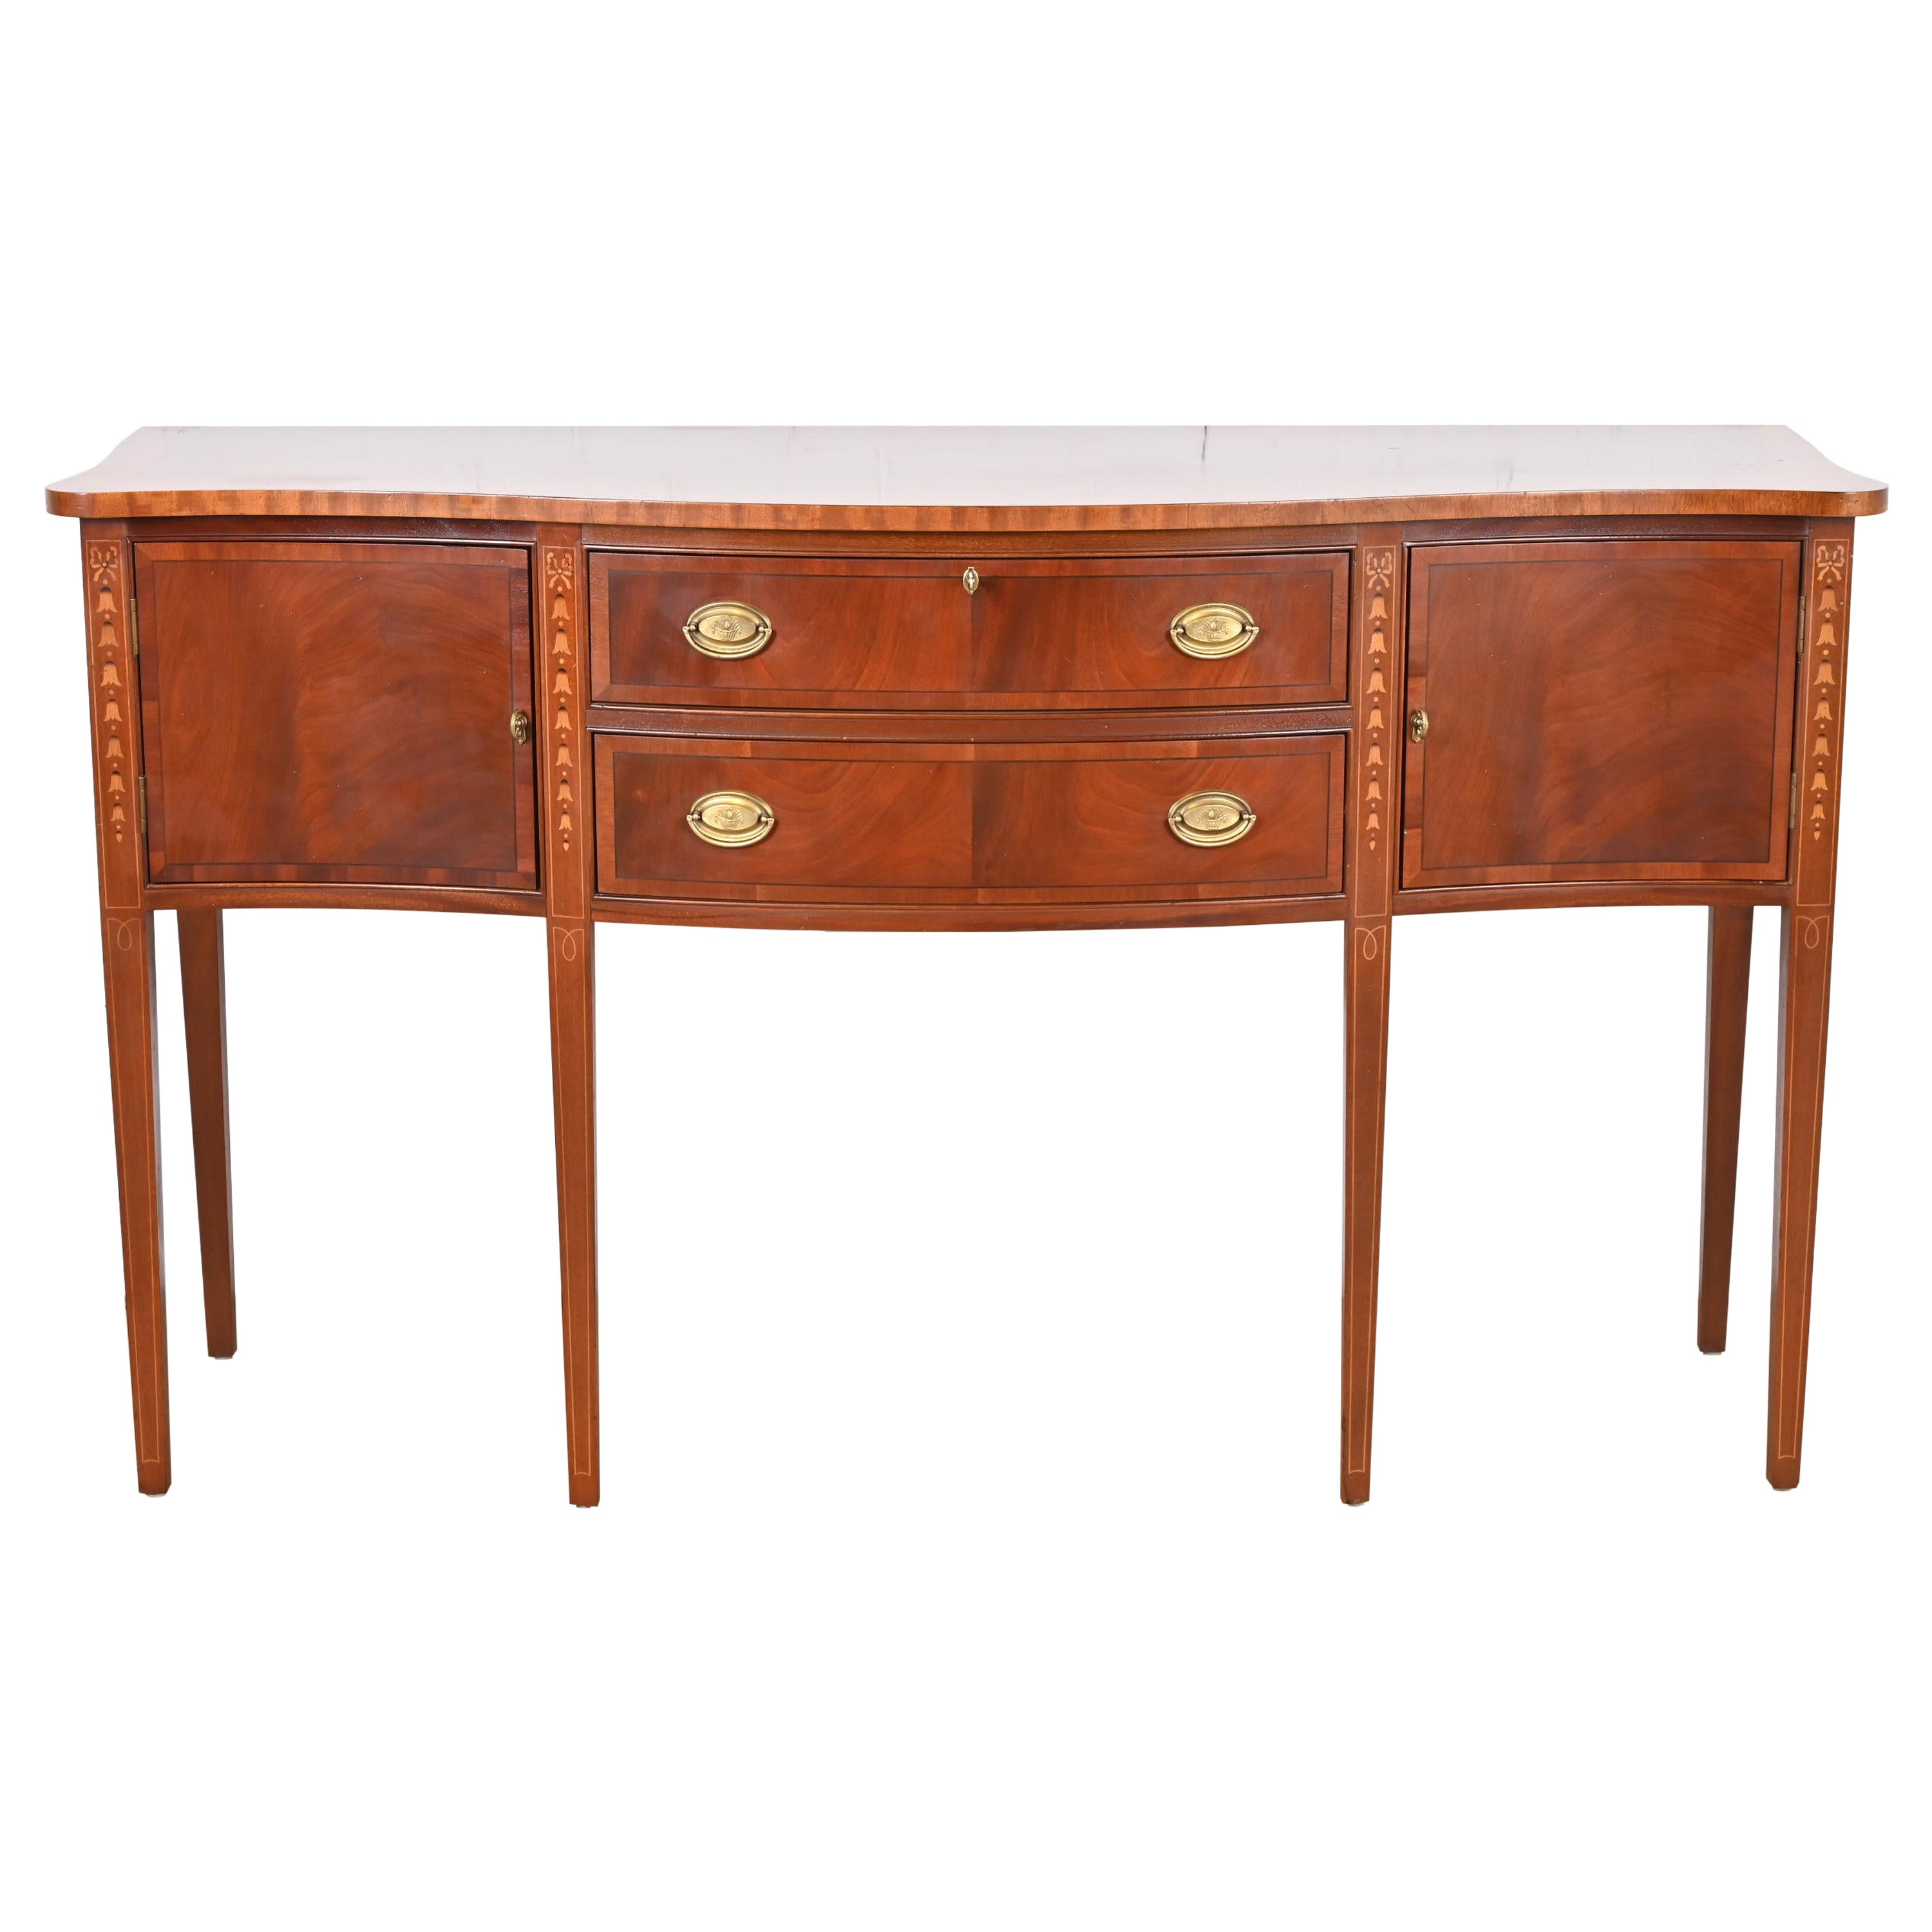 Hepplewhite Inlaid Mahogany Serpentine Front Sideboard Buffet or Credenza For Sale